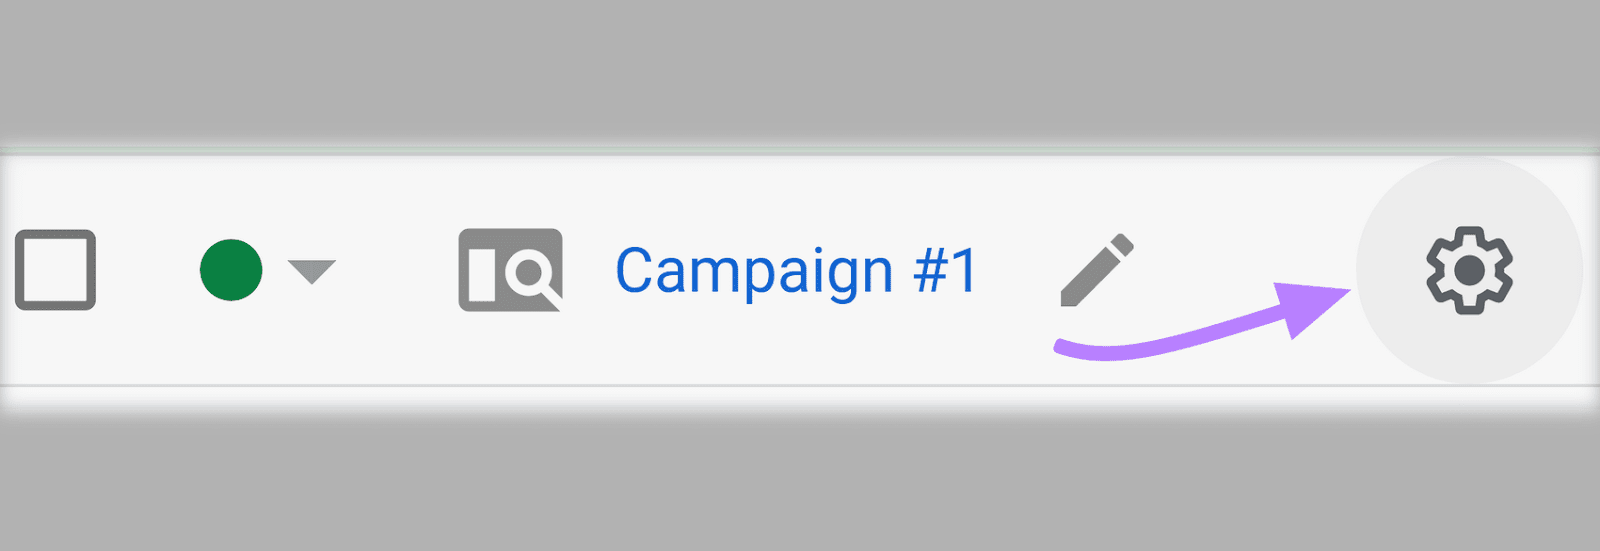 “Campaigns” section in Google Ads dashboard